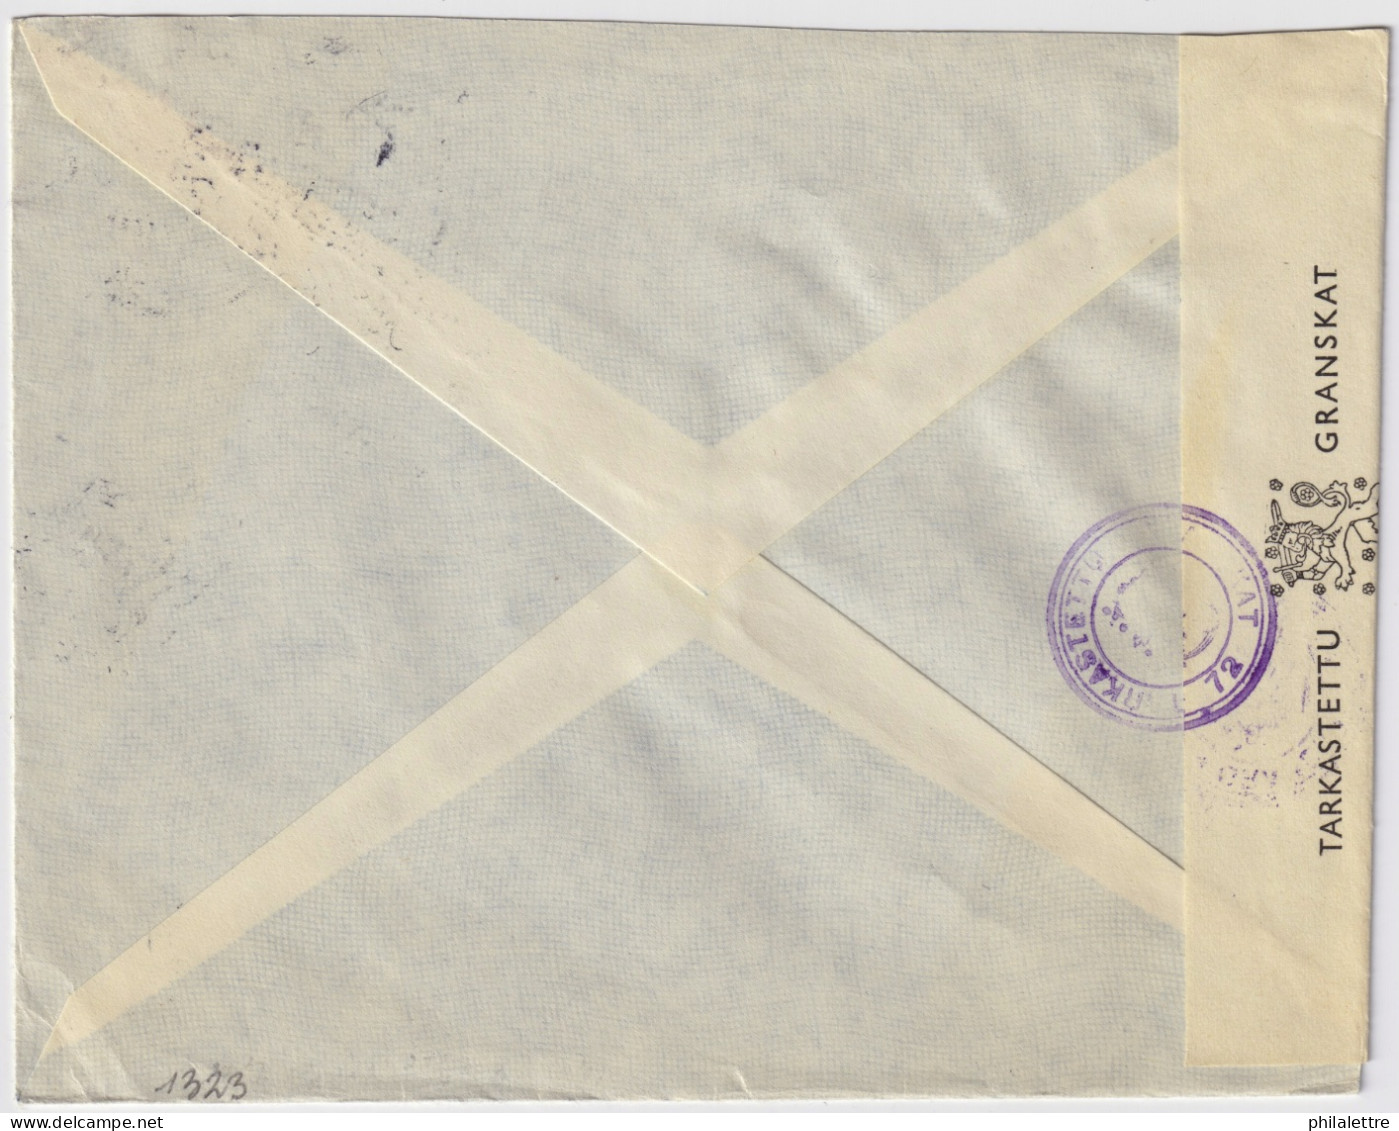 FINLAND - 1942 - Censored Cover From JACOBSTAD To Stockholm, Sweden Franked 2.75Mk - Covers & Documents